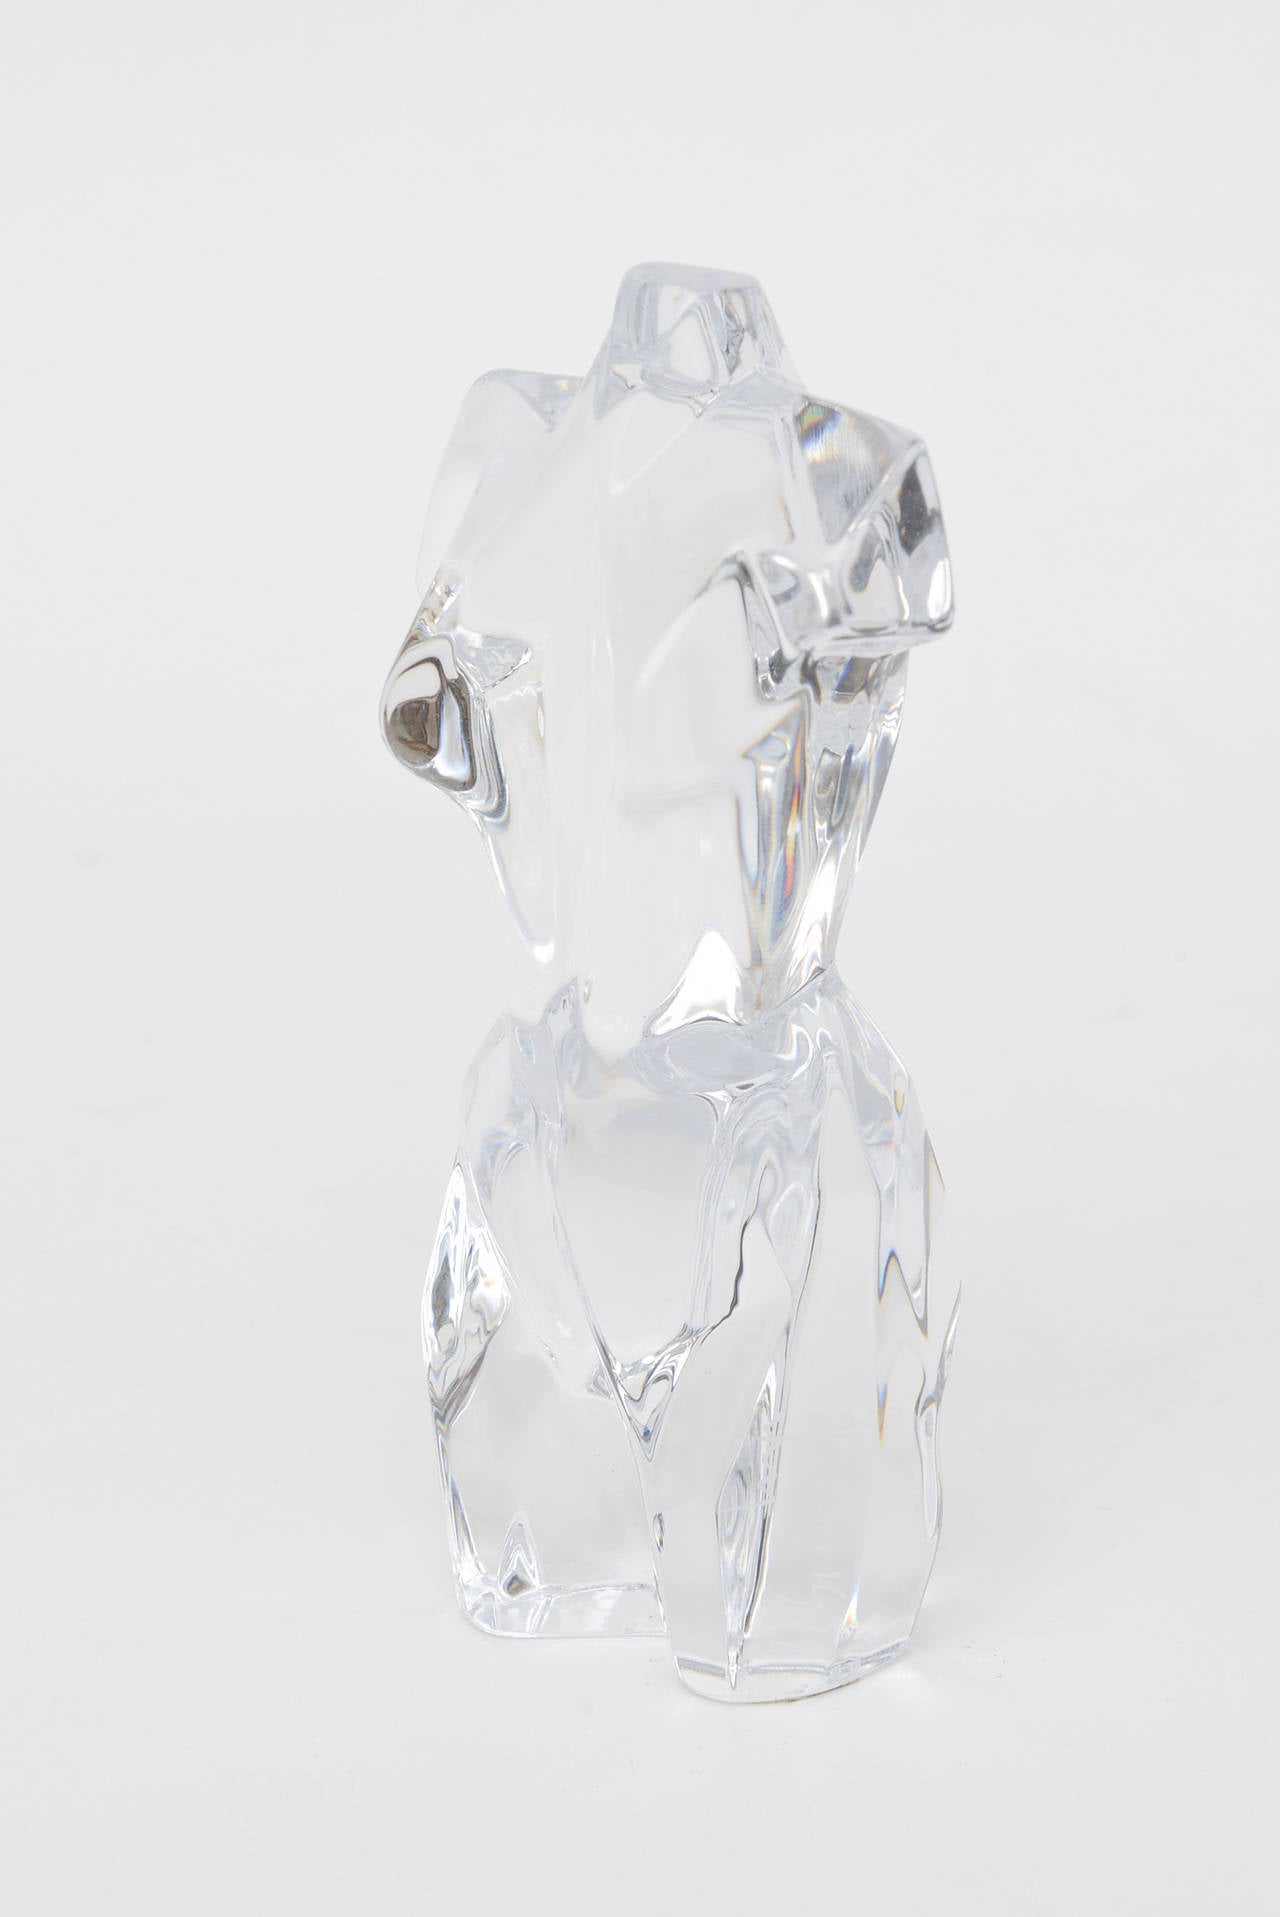 Signed Daum France, this small but lovely crystal glass torso has a cubist feel.
It has a nice weight to it.... all the sides and angles are different.